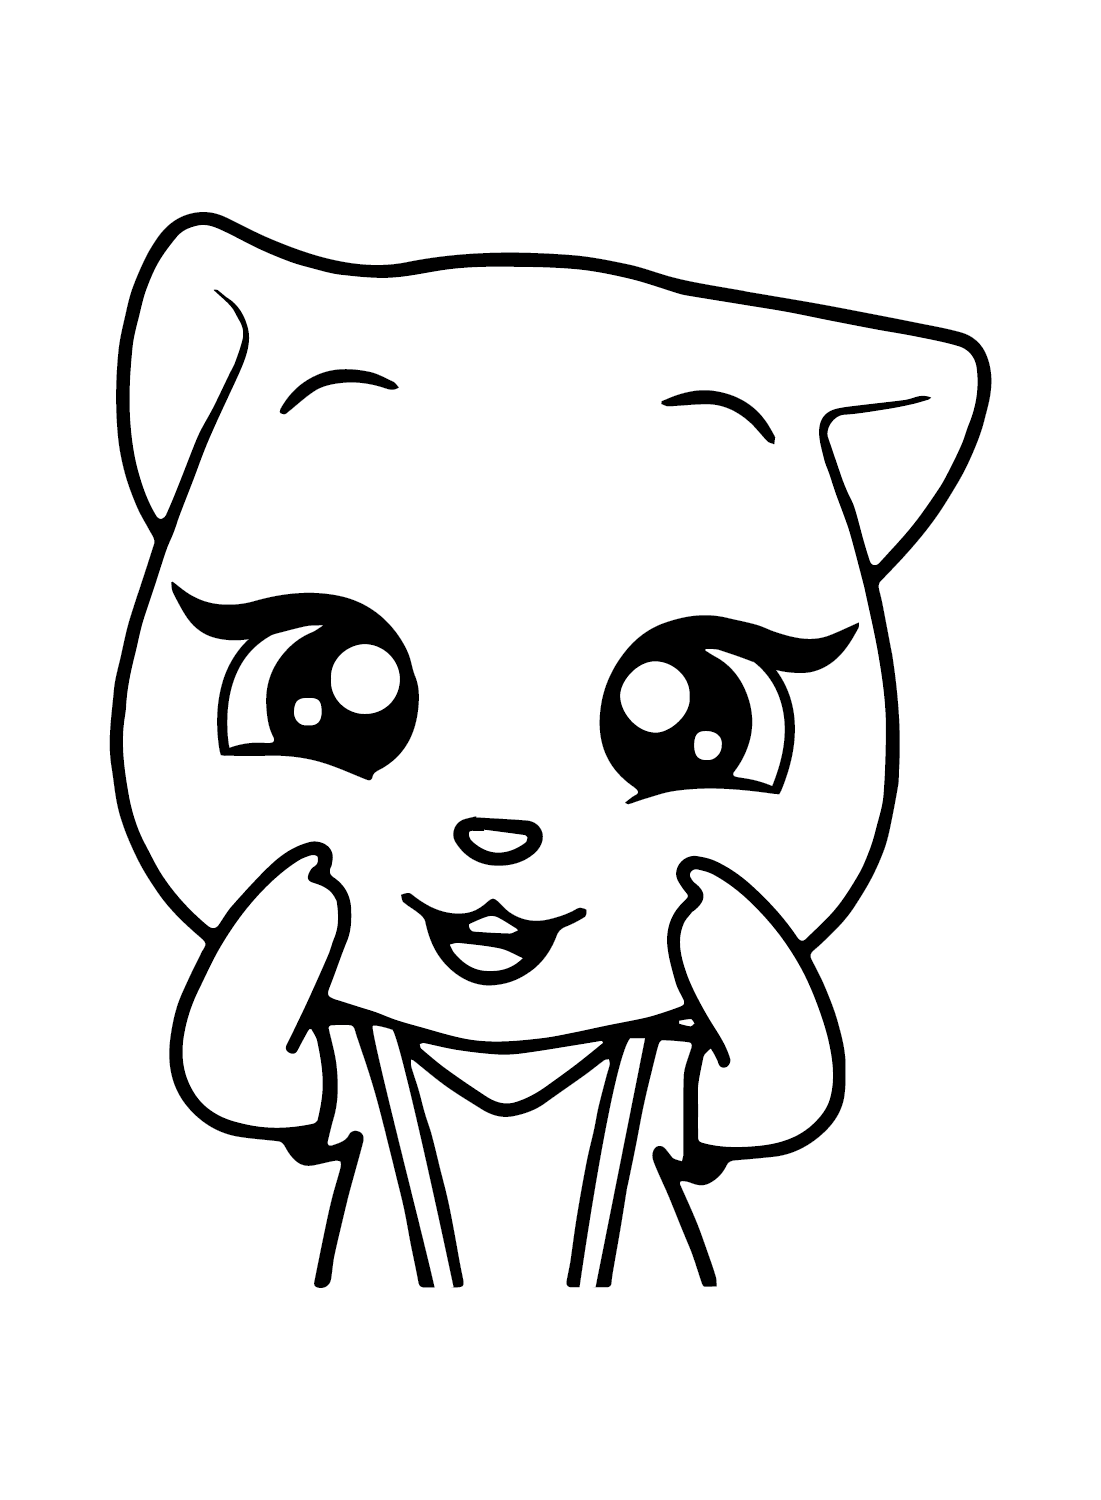 My Talking Angela 2 Coloring Page